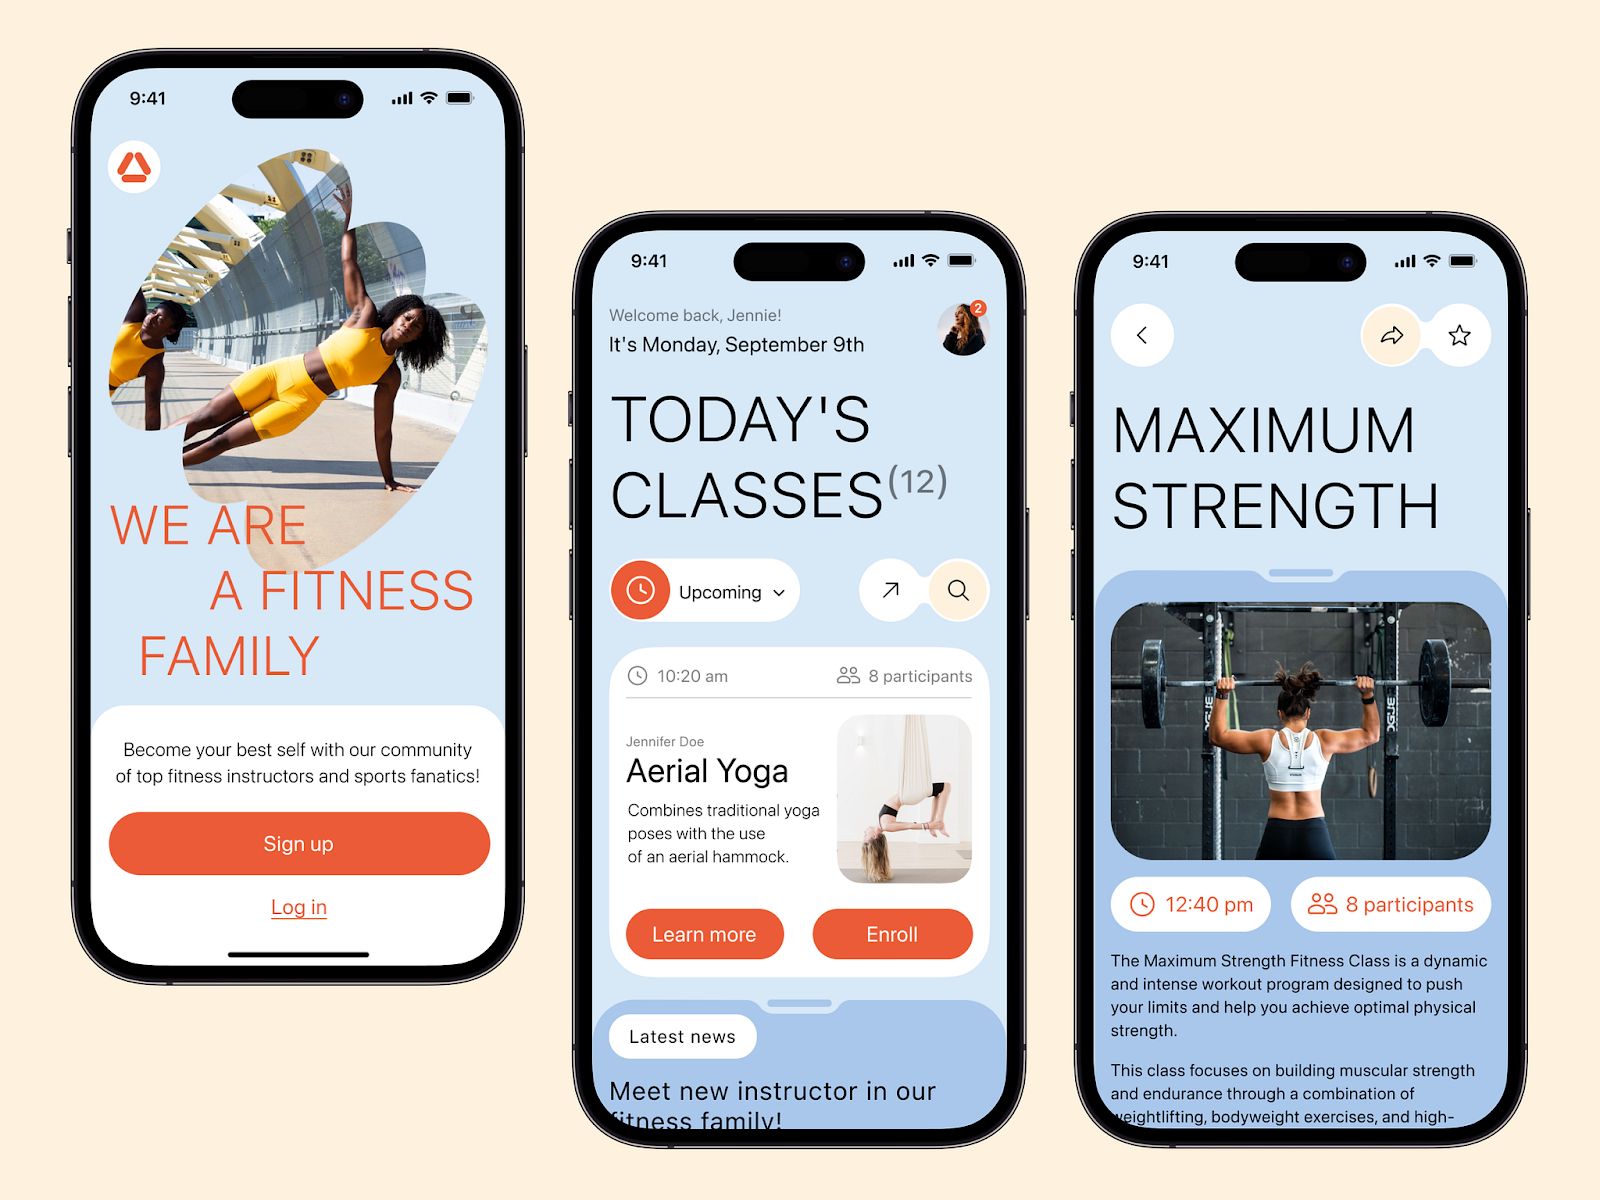 Fitness center apps allow users to book workout sessions and track their progress